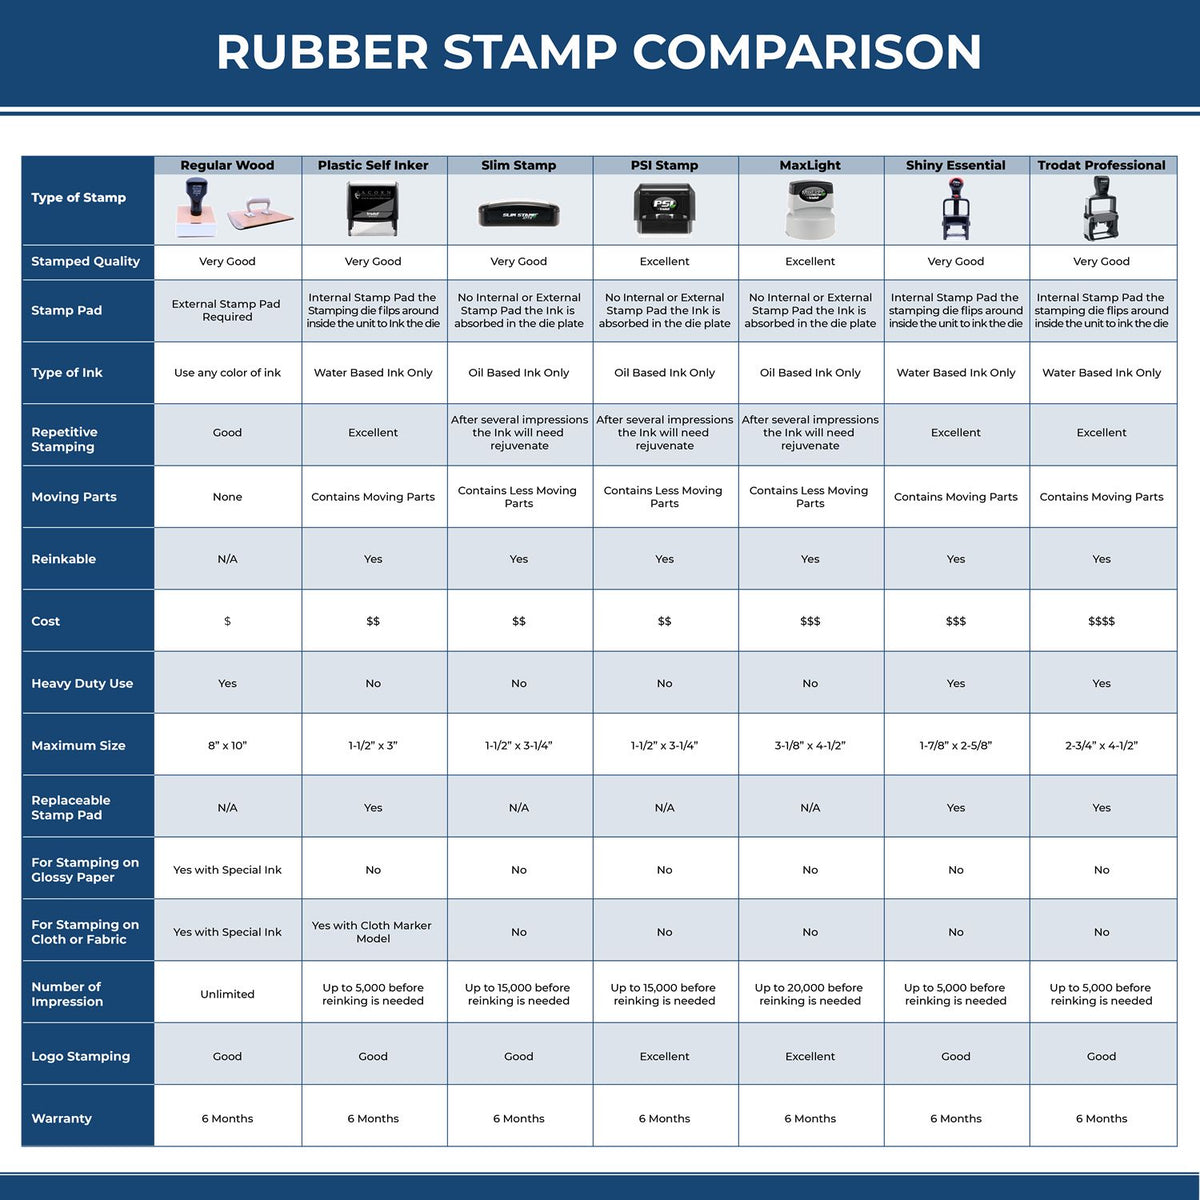 Large Self Inking Pta Stamp 4654S Rubber Stamp Comparison